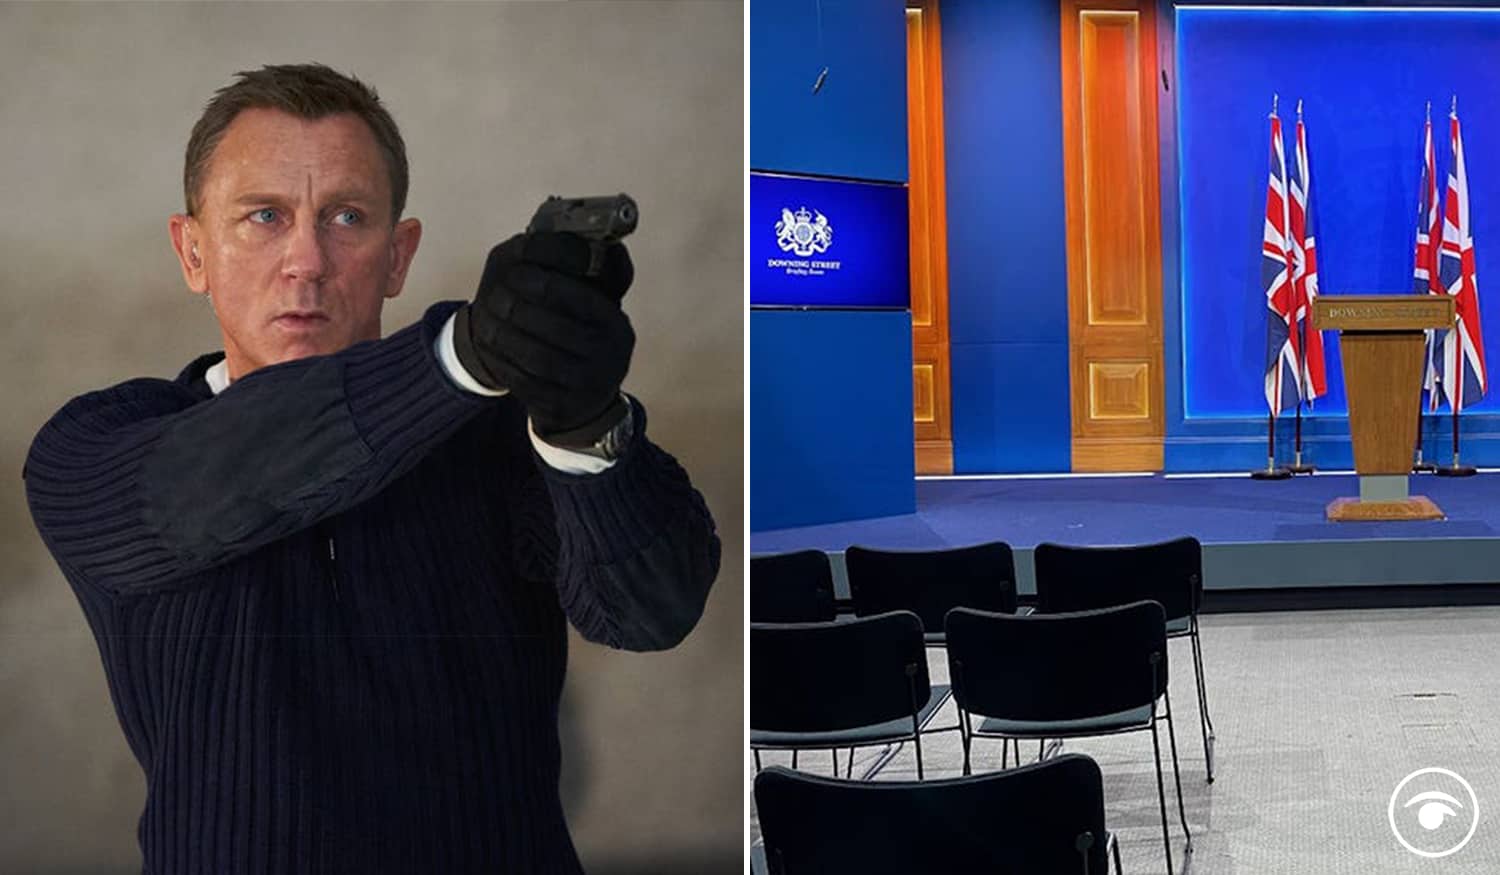 Govt used £2.6m Downing Street briefing room for private screening of James Bond